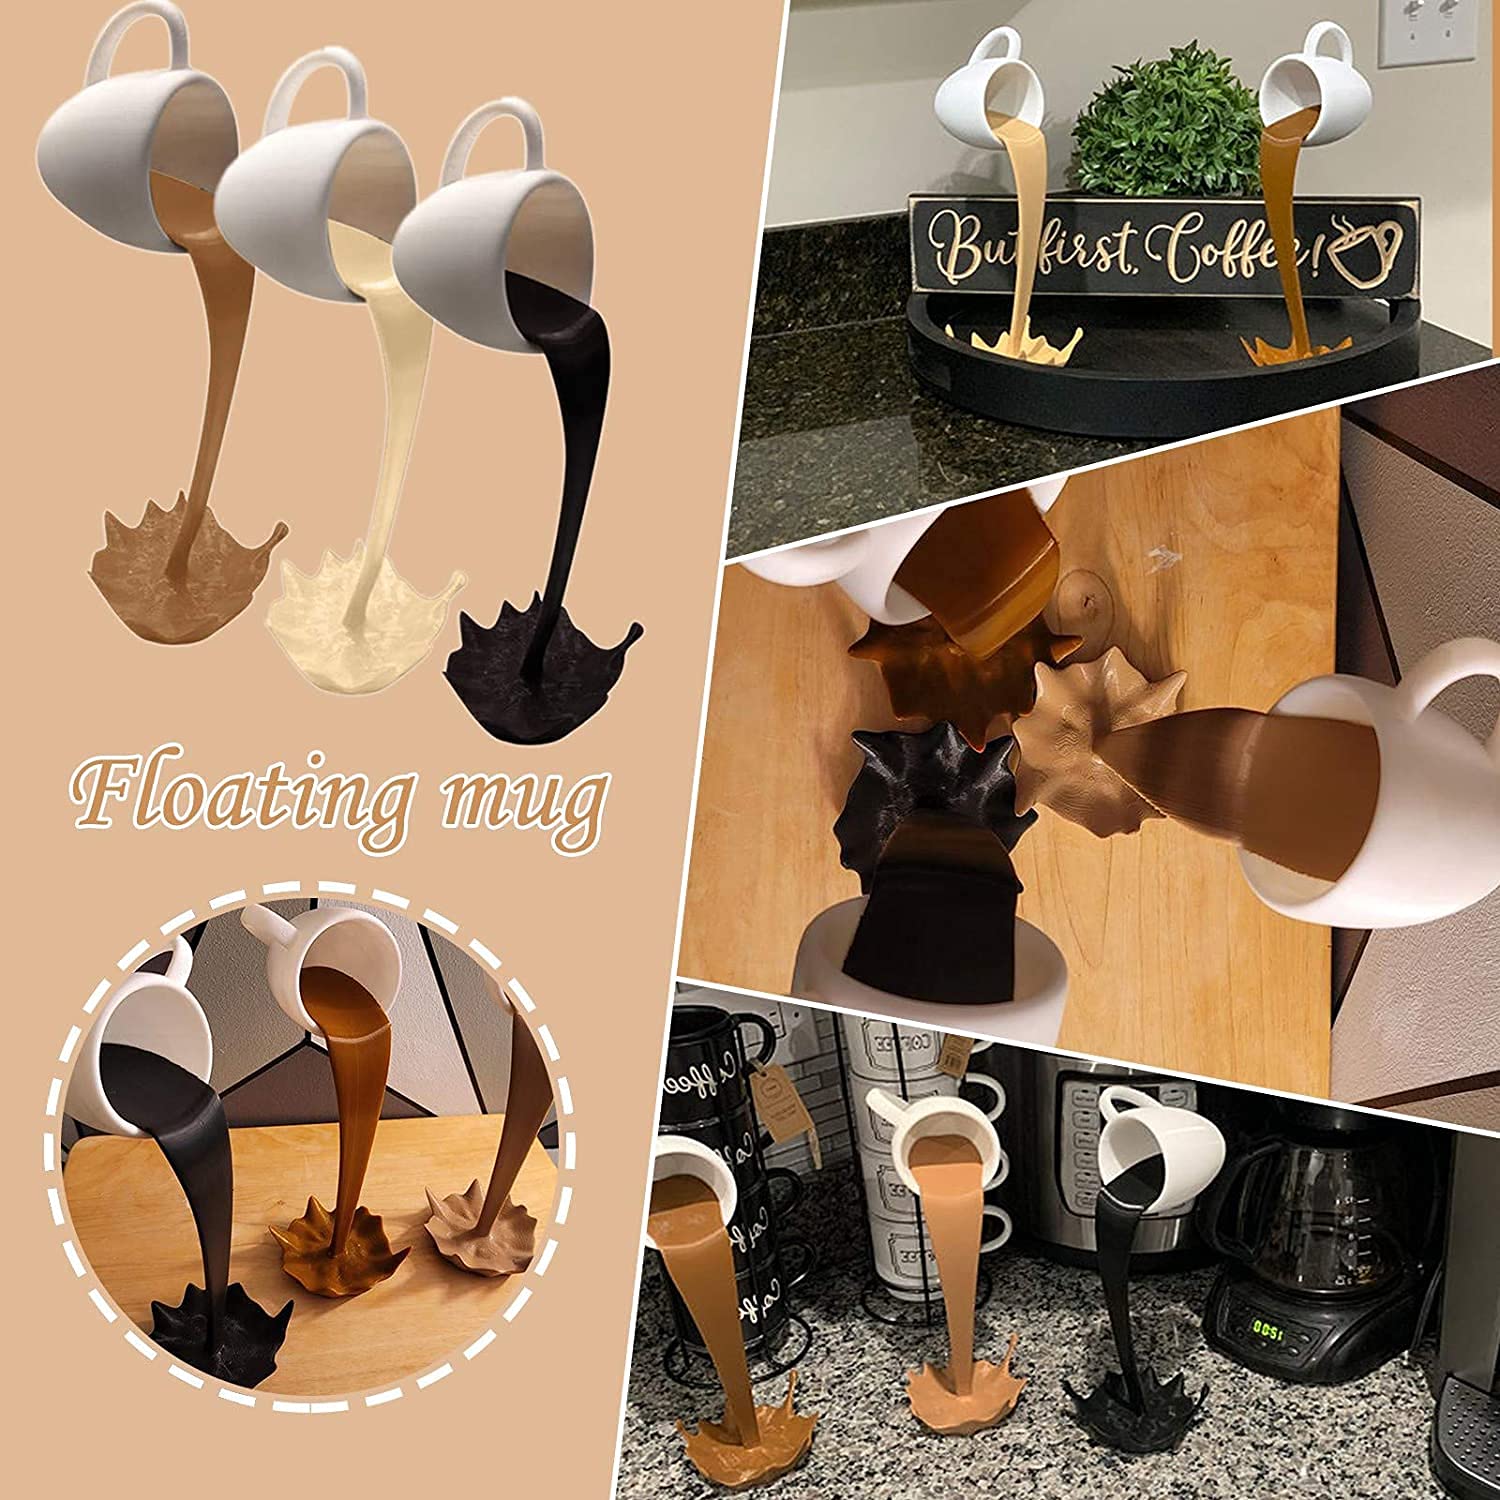 Mini Floating Coffee Cups Magic Pouring Spilling Splash Coffee Mugs Funny Coffee Mug Sculpture Art Decor for Home, Kitchen, Coffee Shop,Dessert Shop,Fun Home Gifts (Brown)